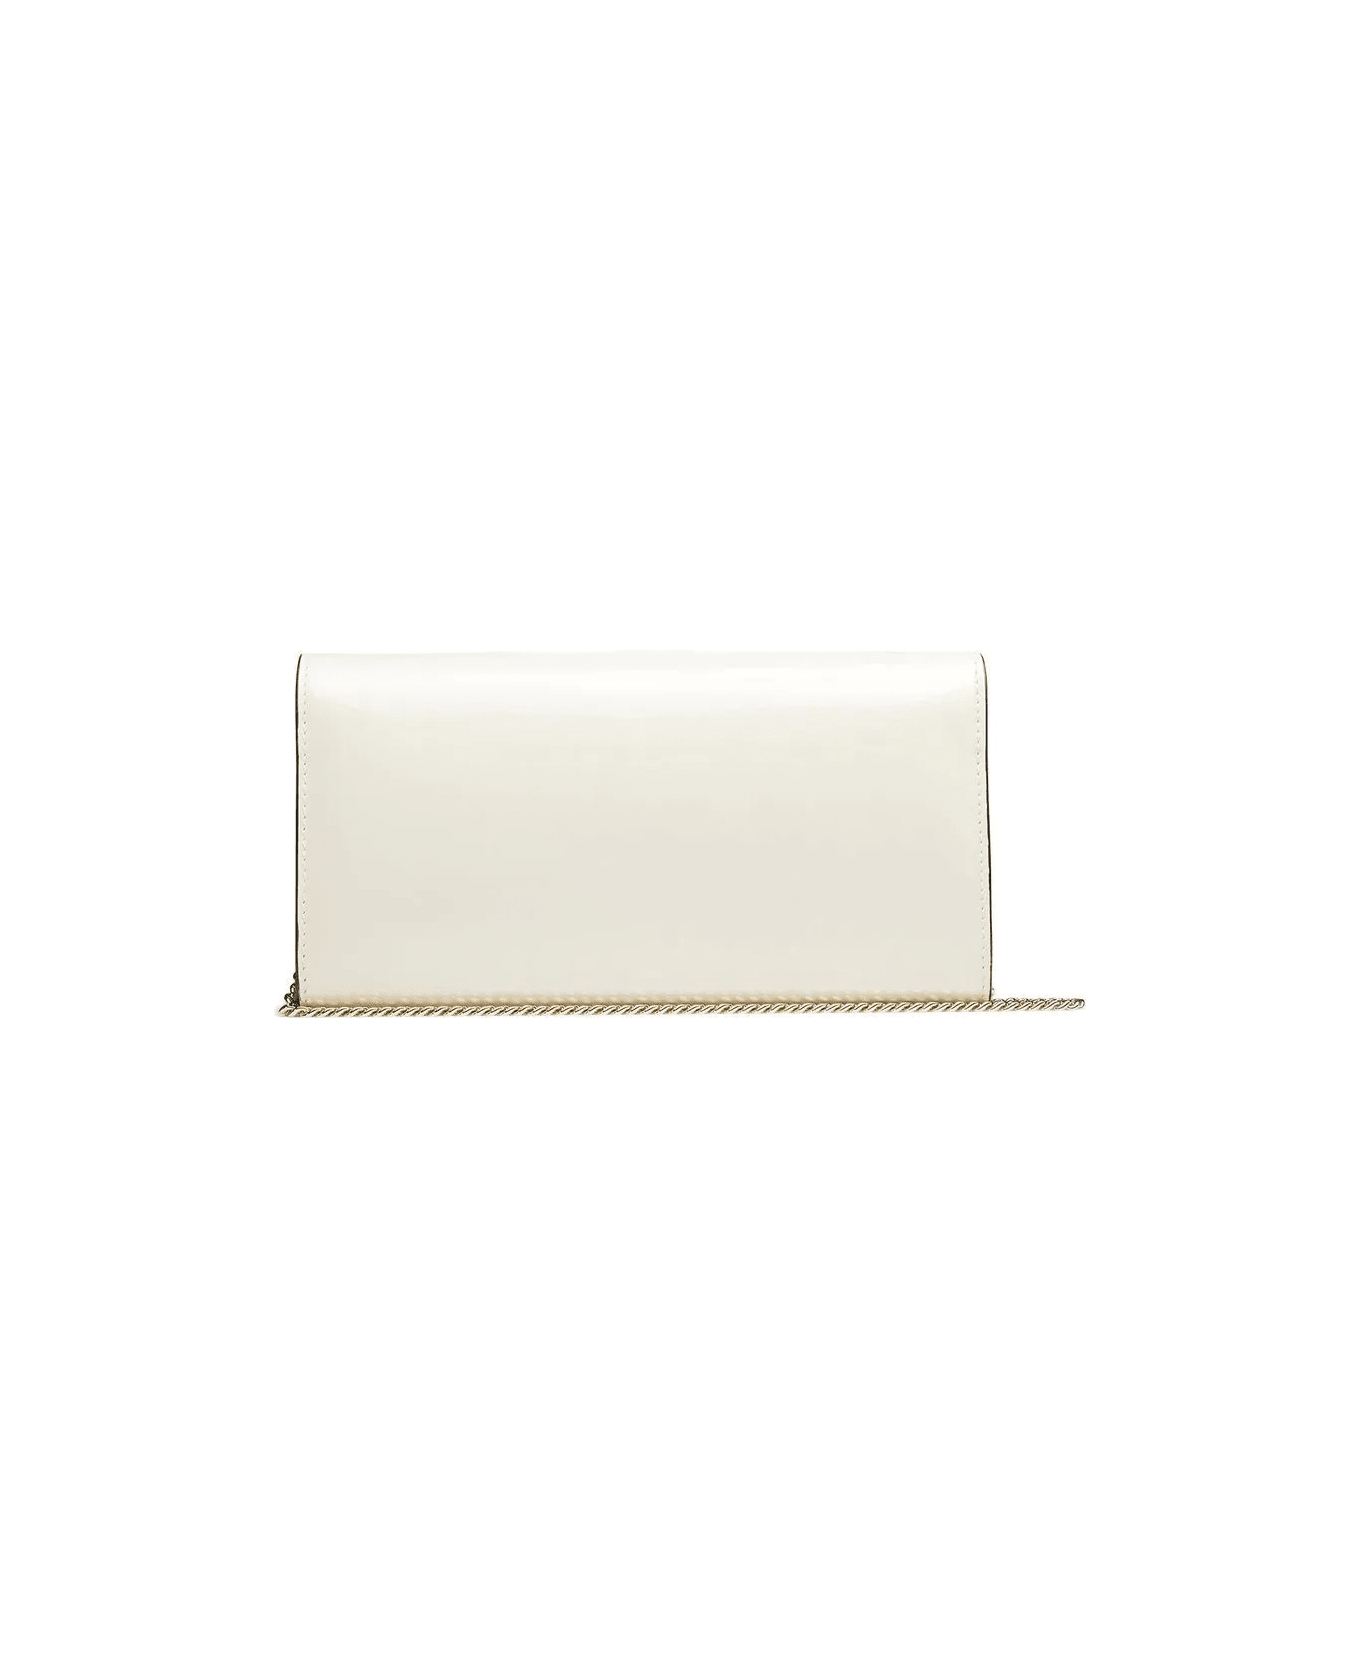 Jimmy Choo Emmie Clutch Bag In Milk Patent Leather - White クラッチバッグ